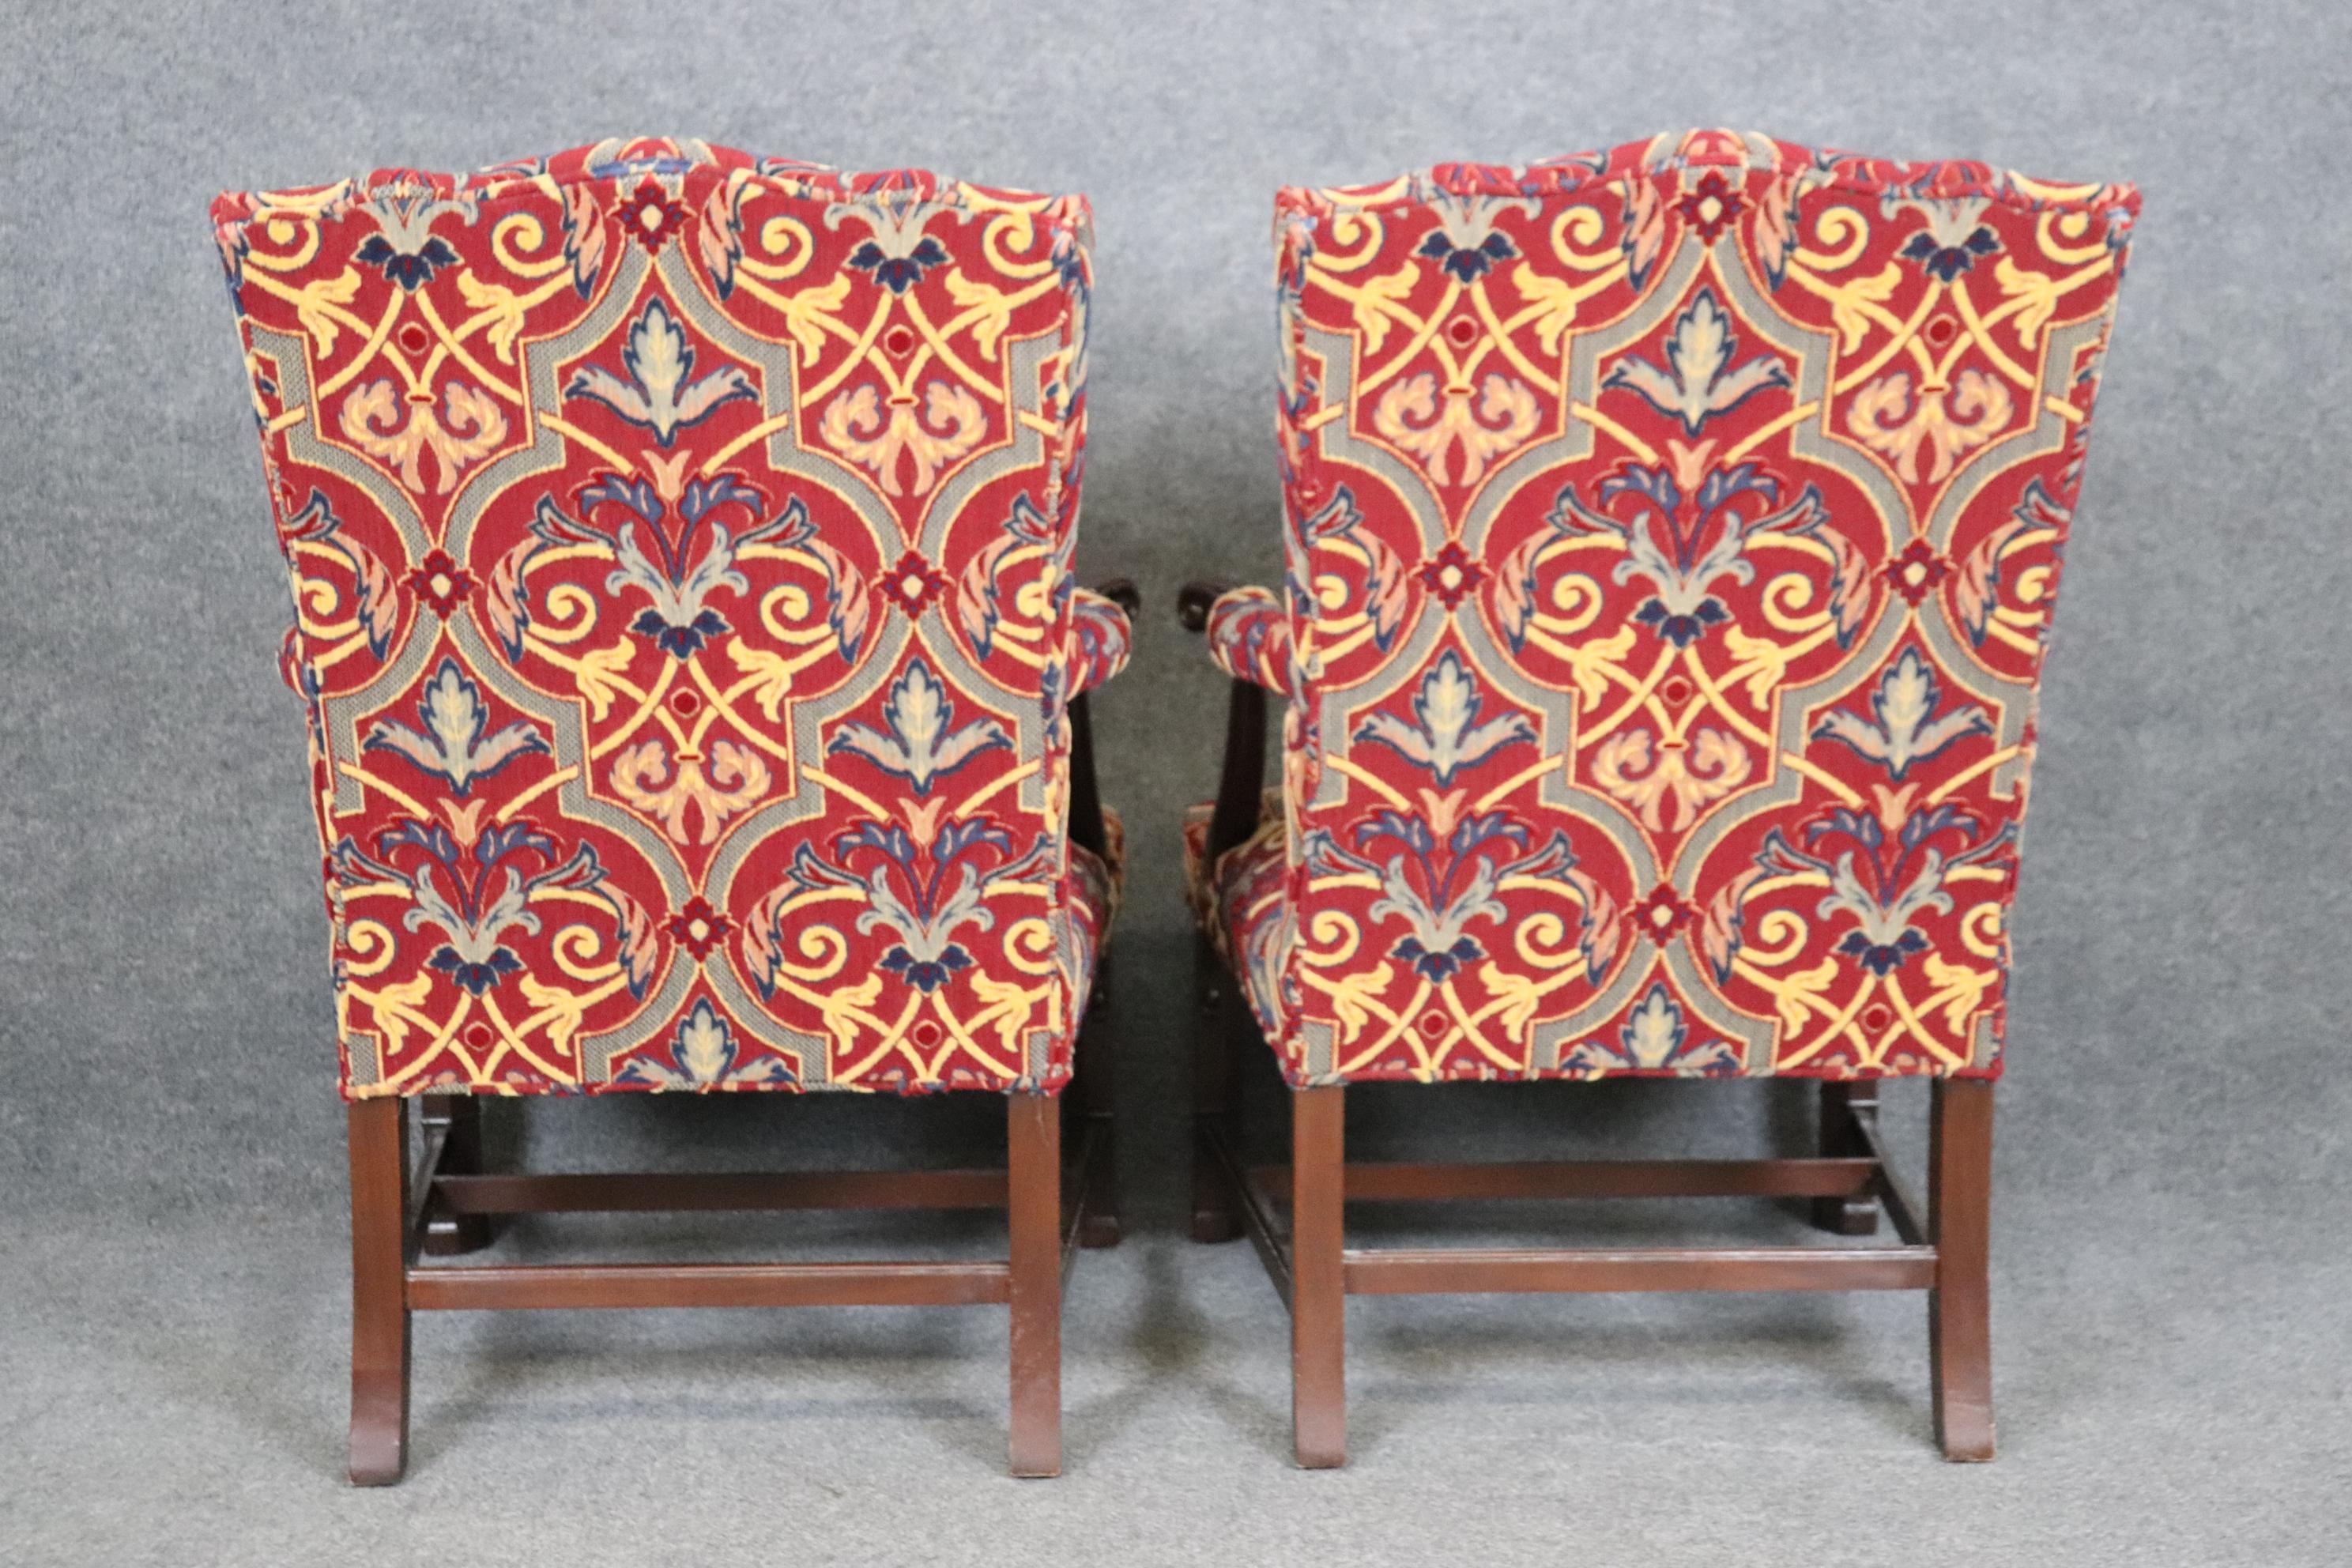 Contemporary Pair of Solid Mahogany Blind Fretwork Chinese Chippendale Armchairs By Southwood For Sale